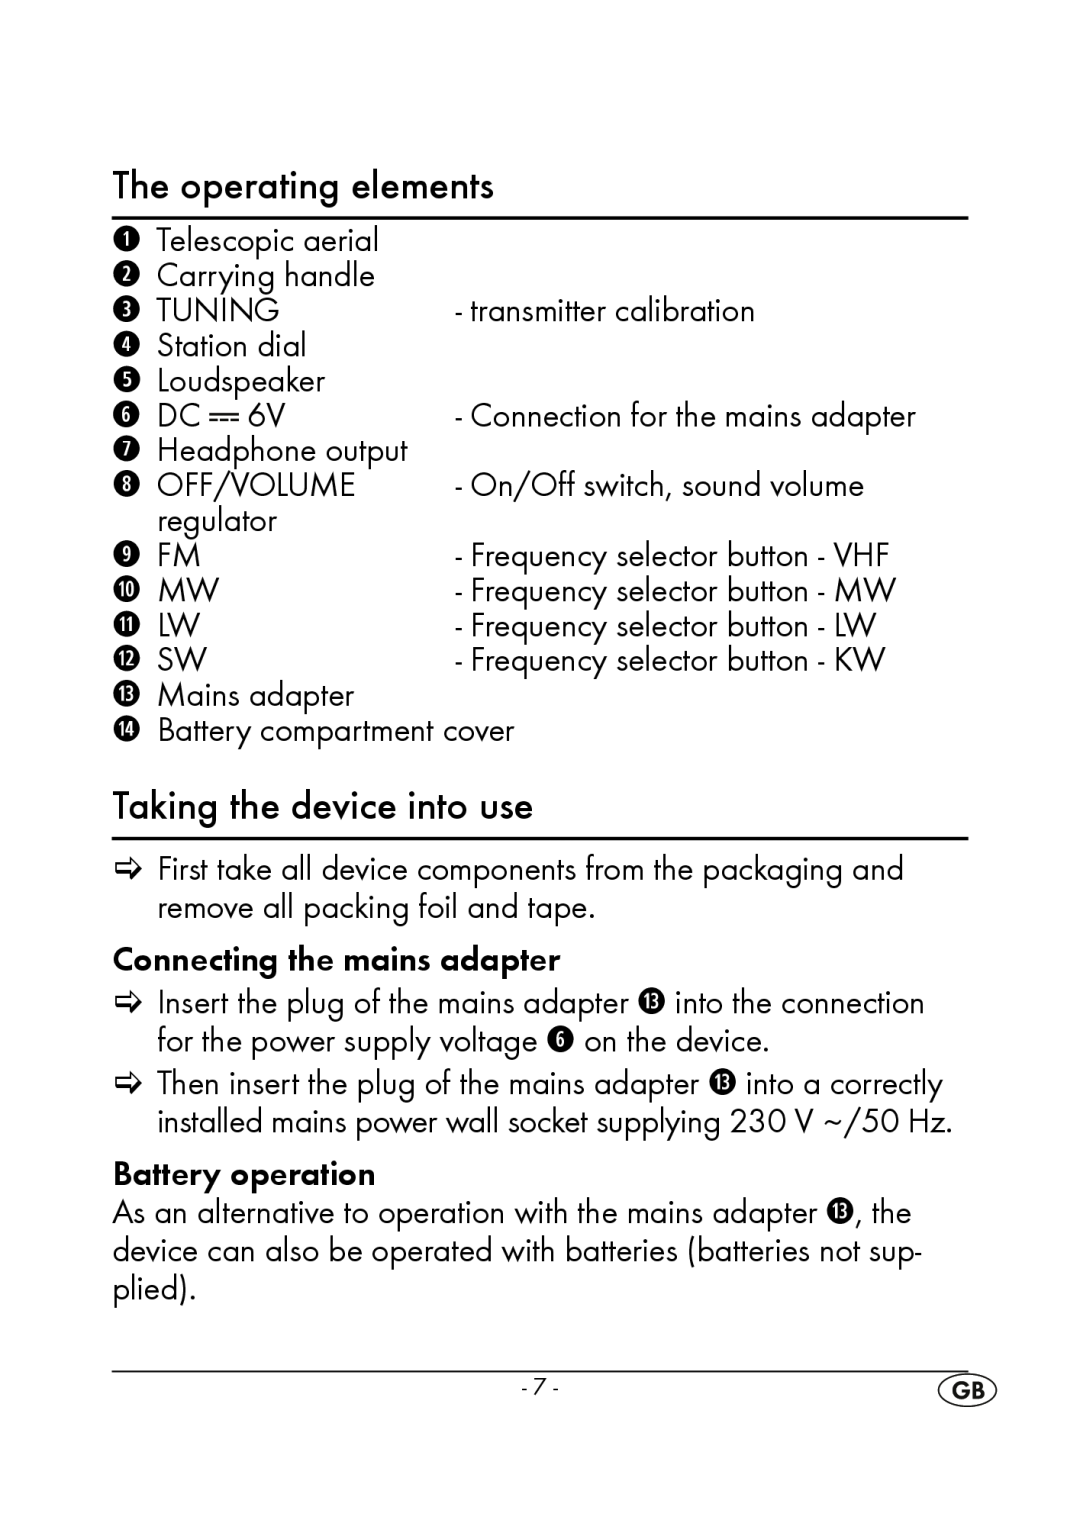 Silvercrest KH2351 instruction manual The operating elements, Taking the device into use, y DC, o FM, a MW, s LW, d SW 